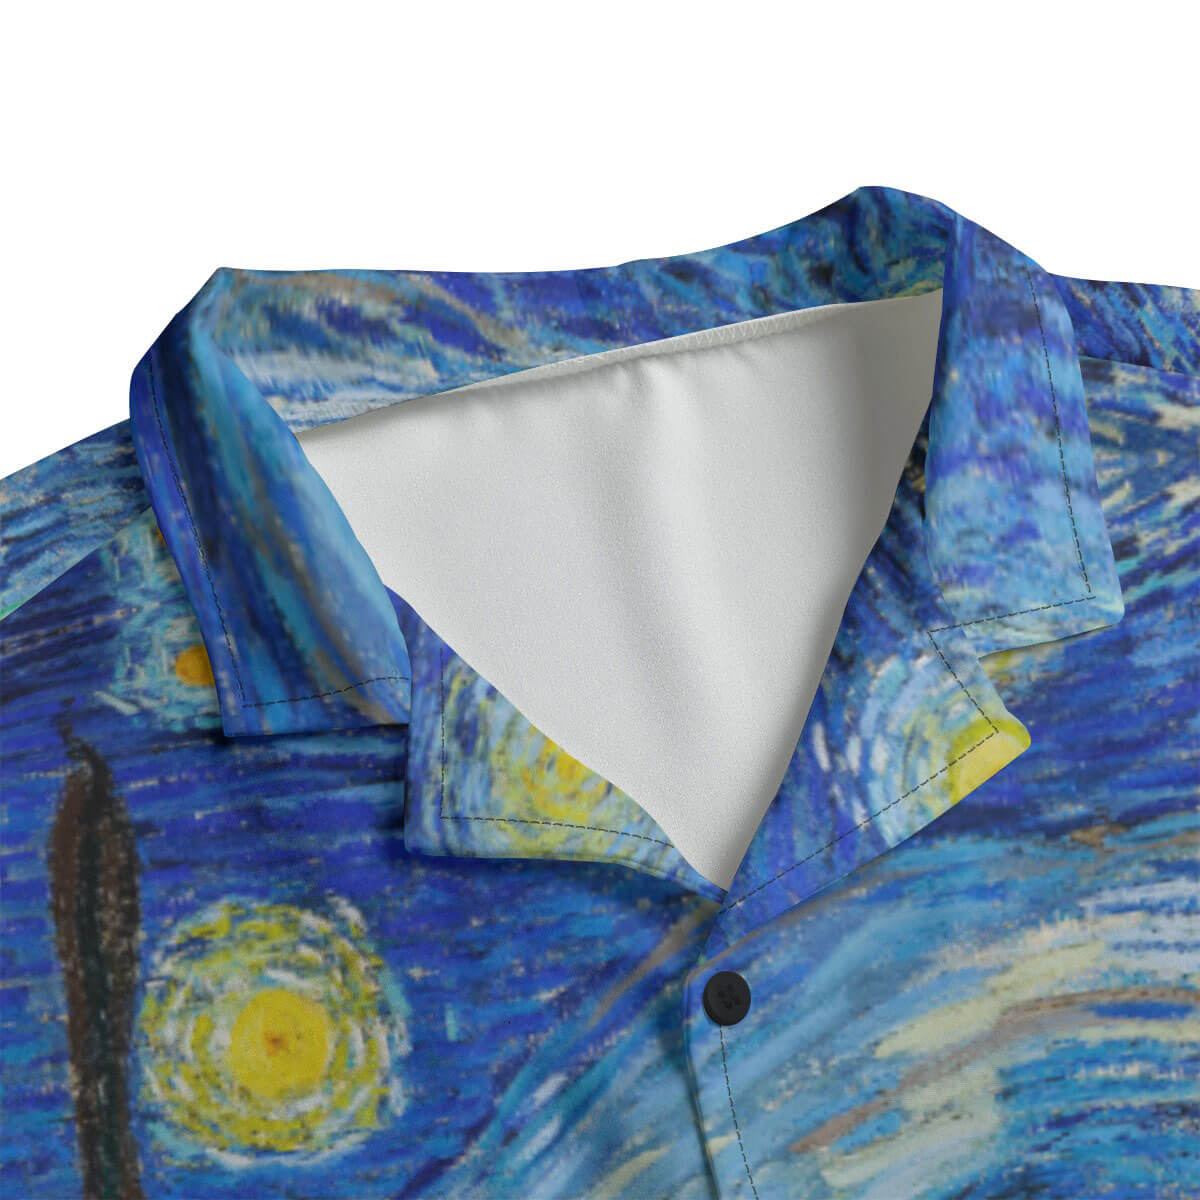 The Starry Night Hawaiian shirt paired with casual summer outfit